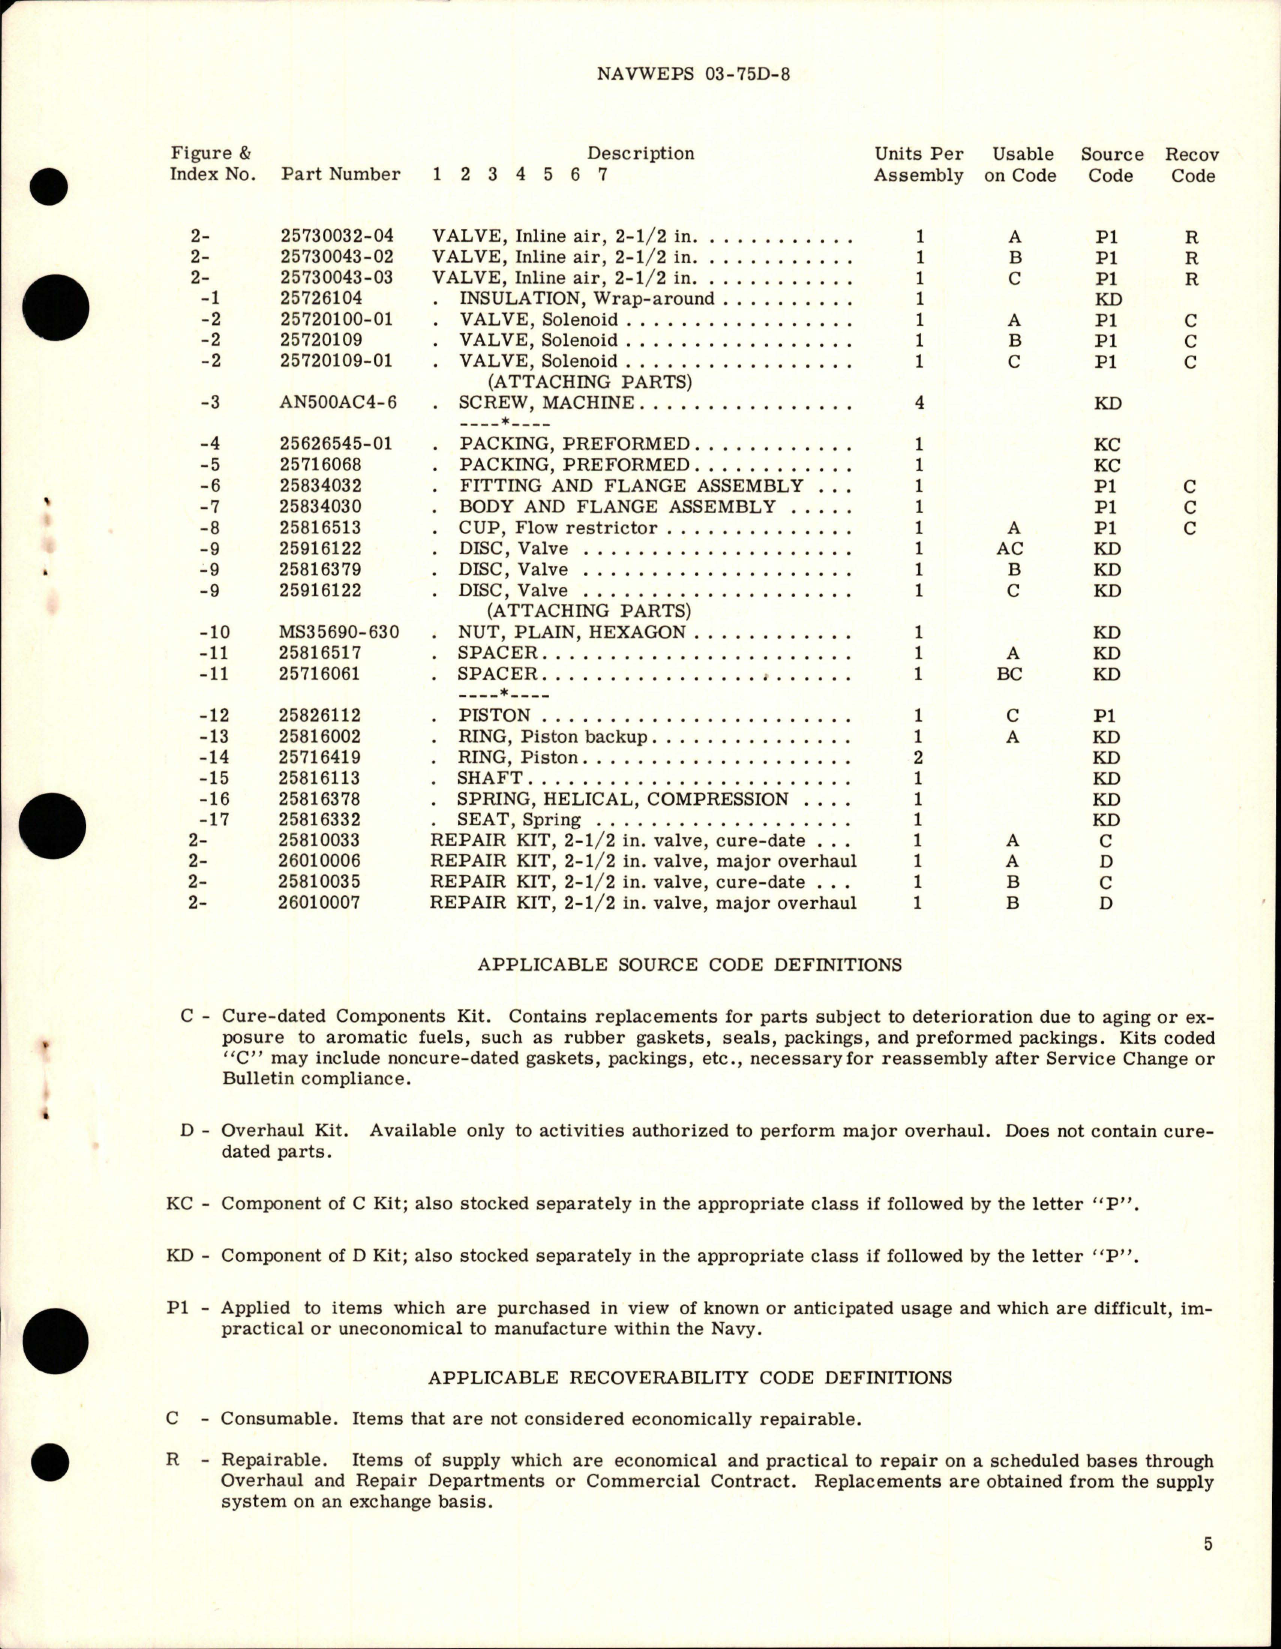 Sample page 5 from AirCorps Library document: Overhaul Instructions with Illustrated Parts Breakdown for Inline Air Valve - 2.5 Inch